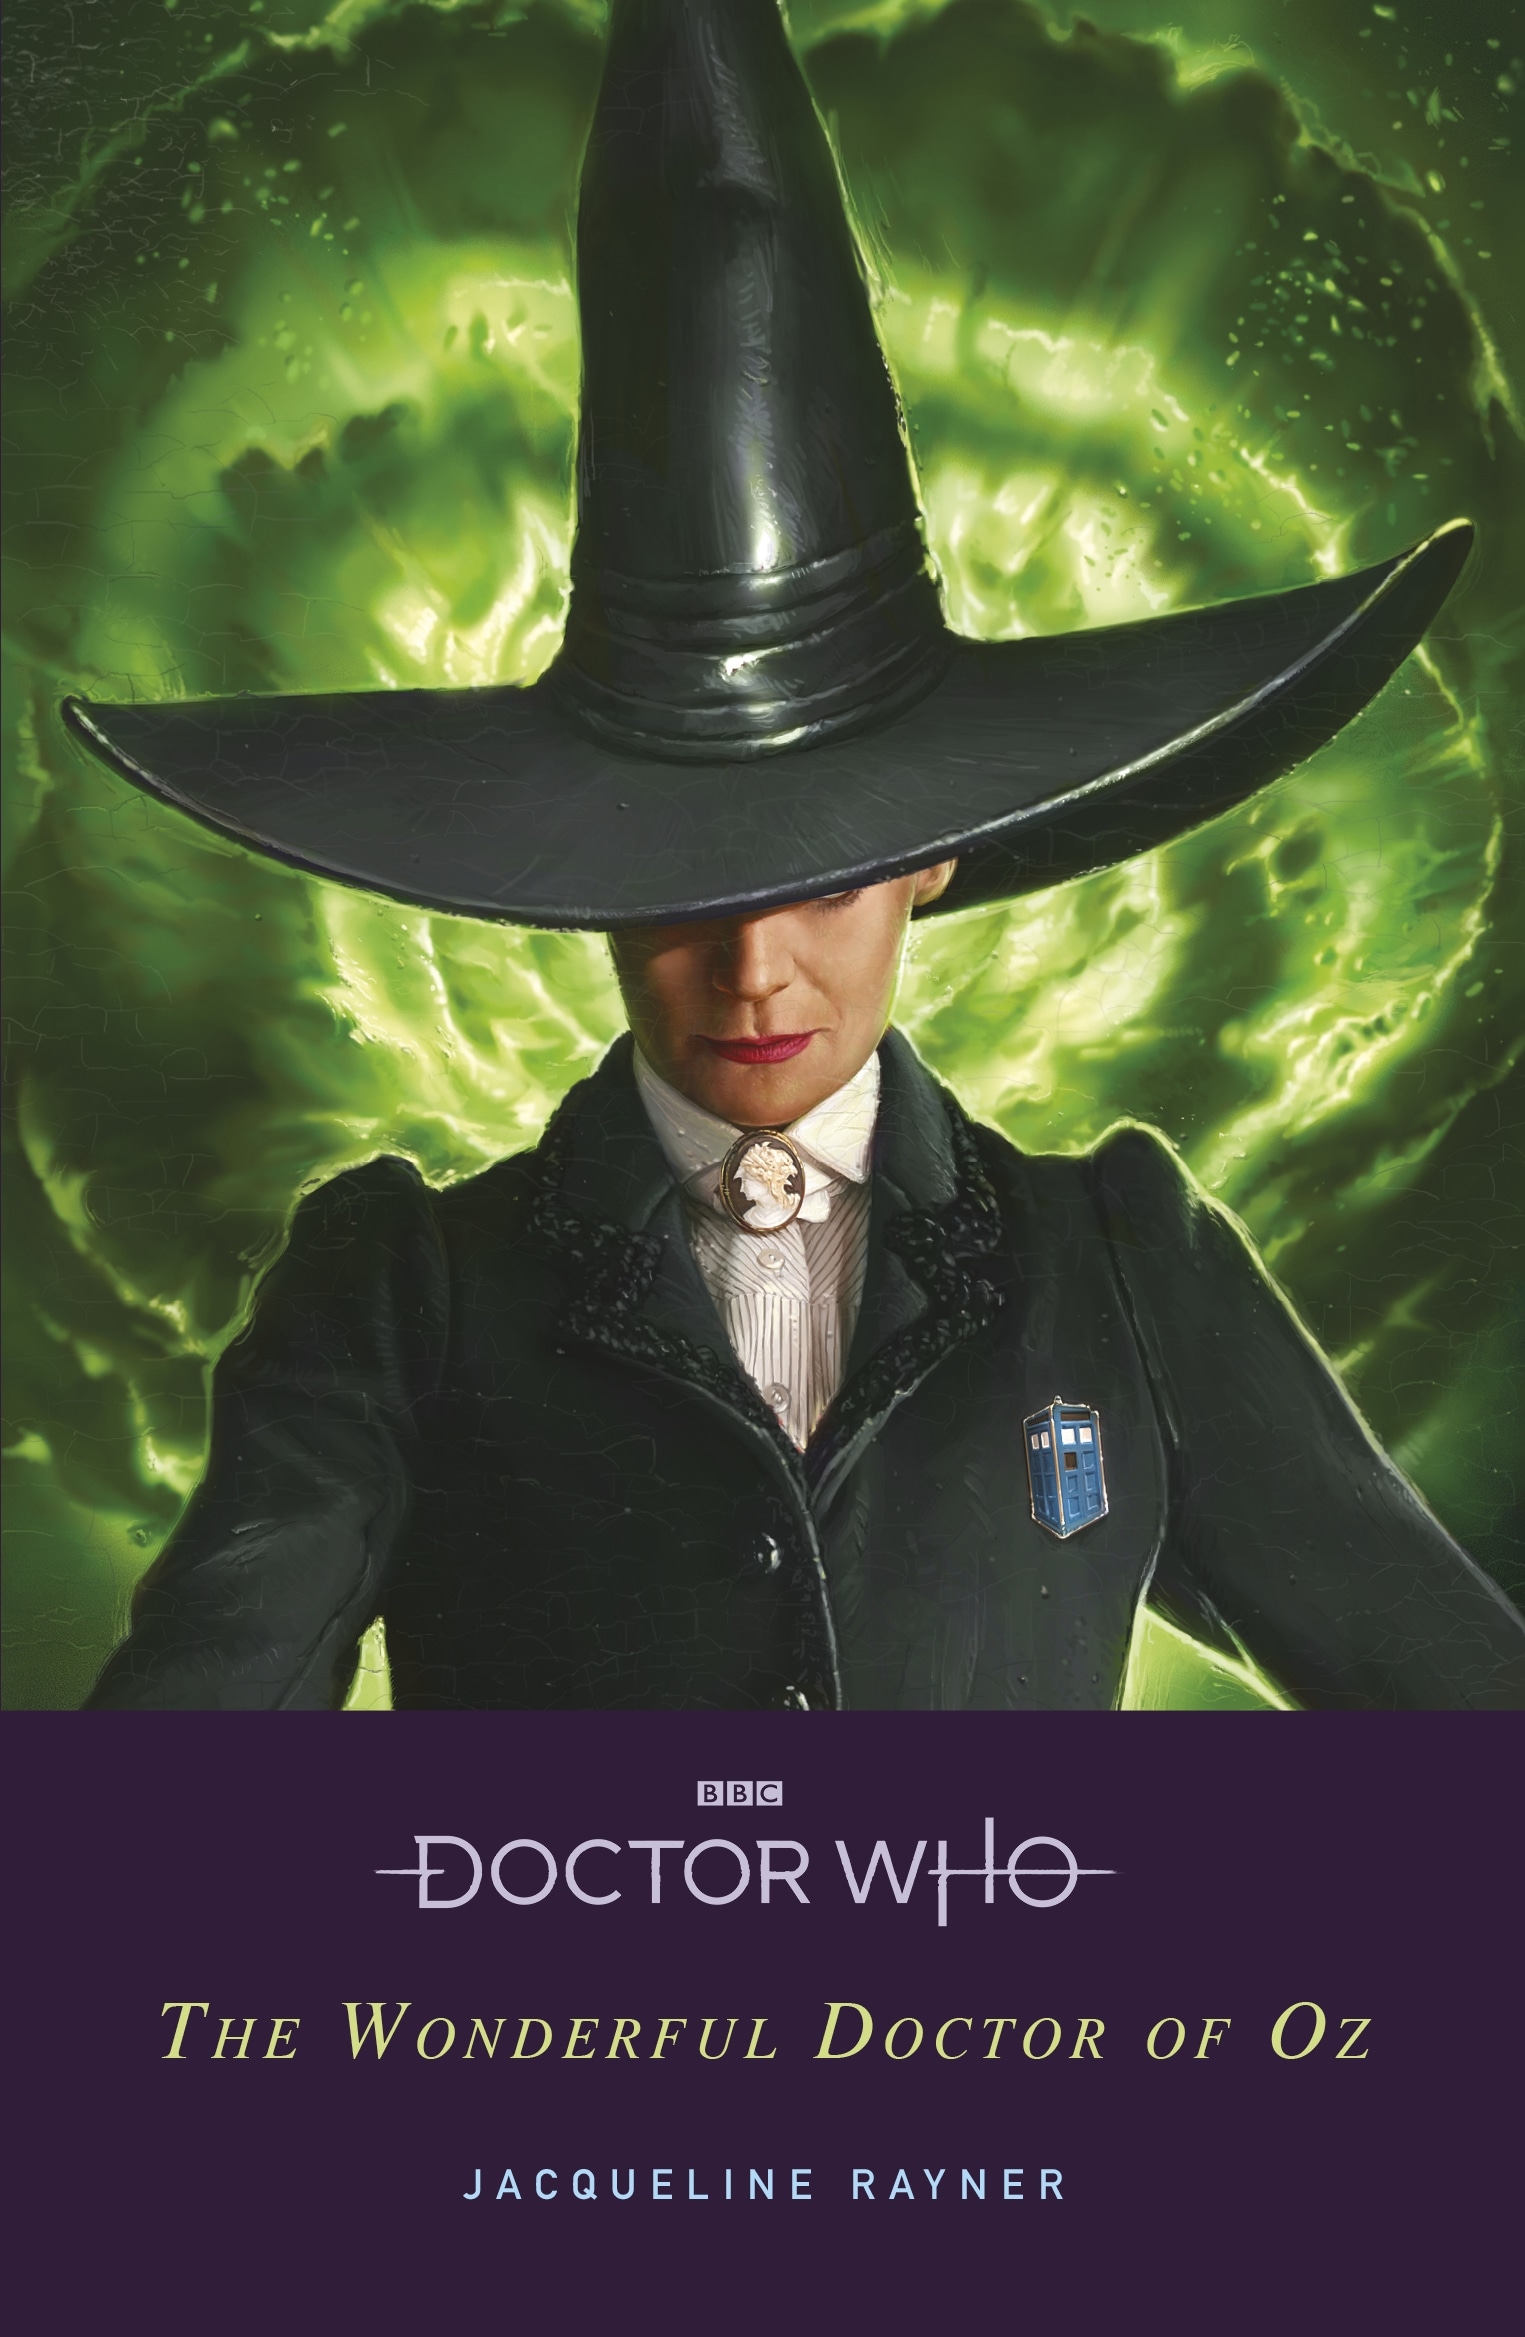 Book “Doctor Who: The Wonderful Doctor of Oz” by Jacqueline Rayner — June 10, 2021